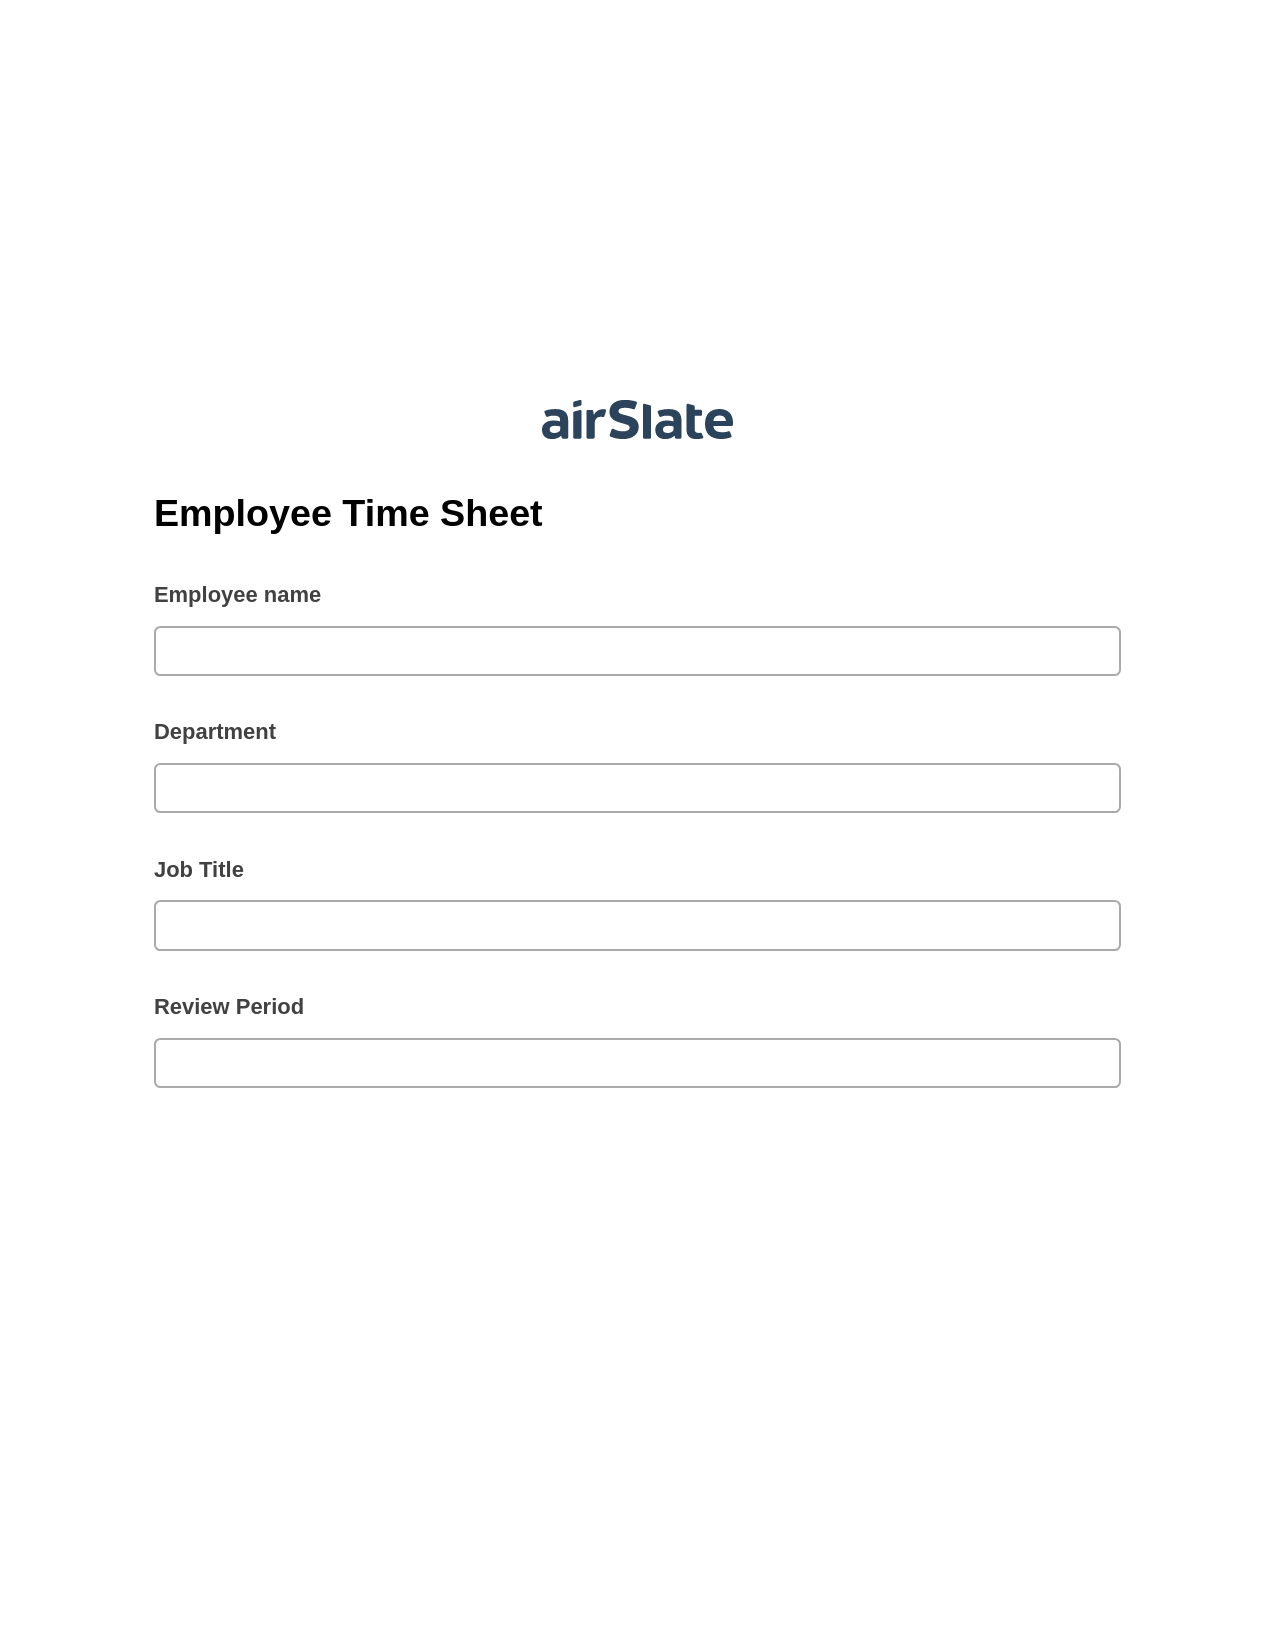 Employee Time Sheet Pre-fill from Litmos bot, Create Salesforce Records Bot, Archive to SharePoint Folder Bot